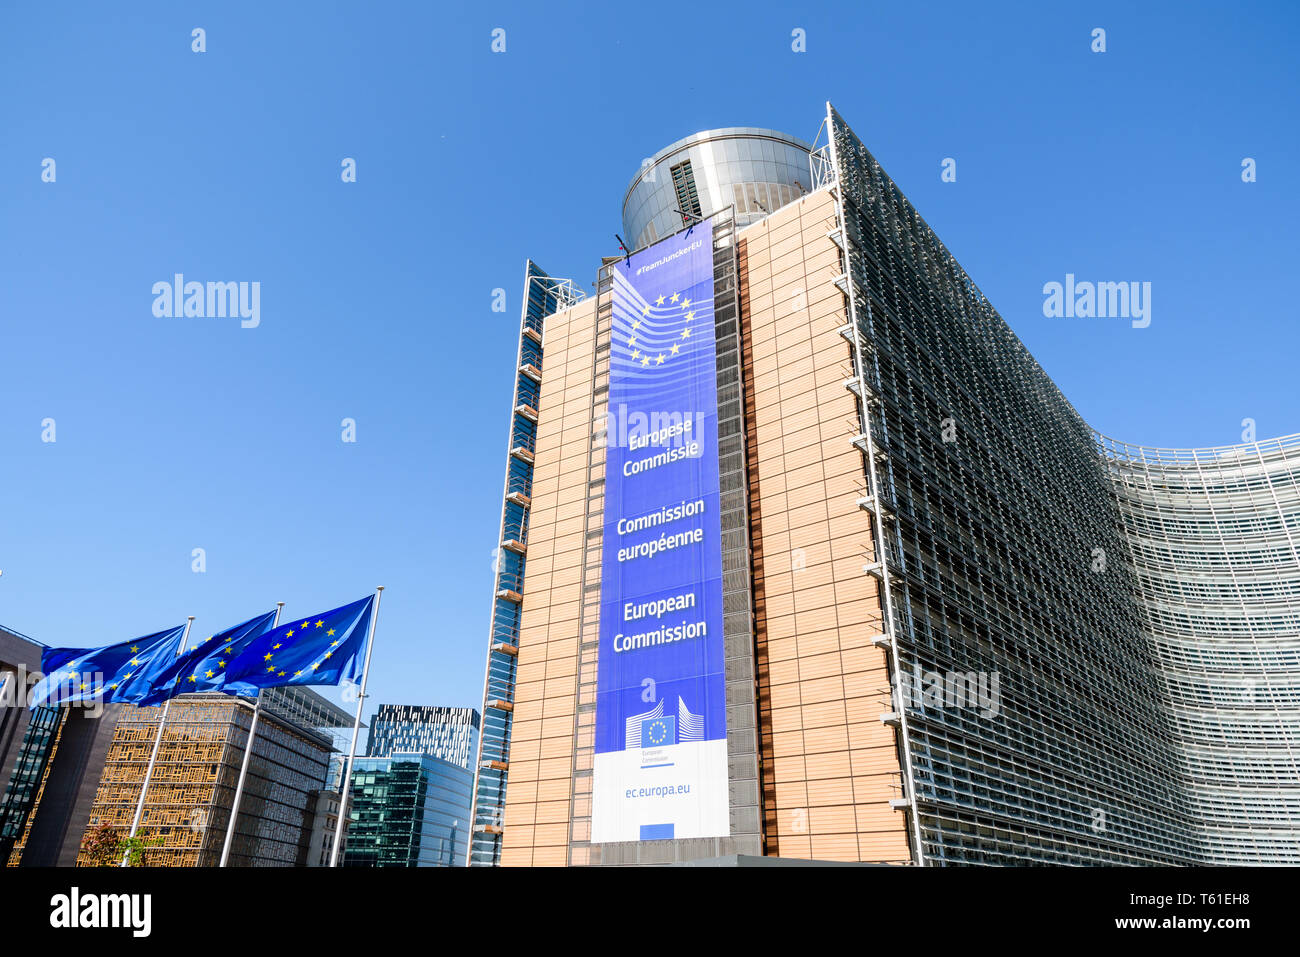 Low angle view of the large banner on the facade of the southern wing of the Berlaymont building, seat of the European Commission in Brussels, Belgium Stock Photo